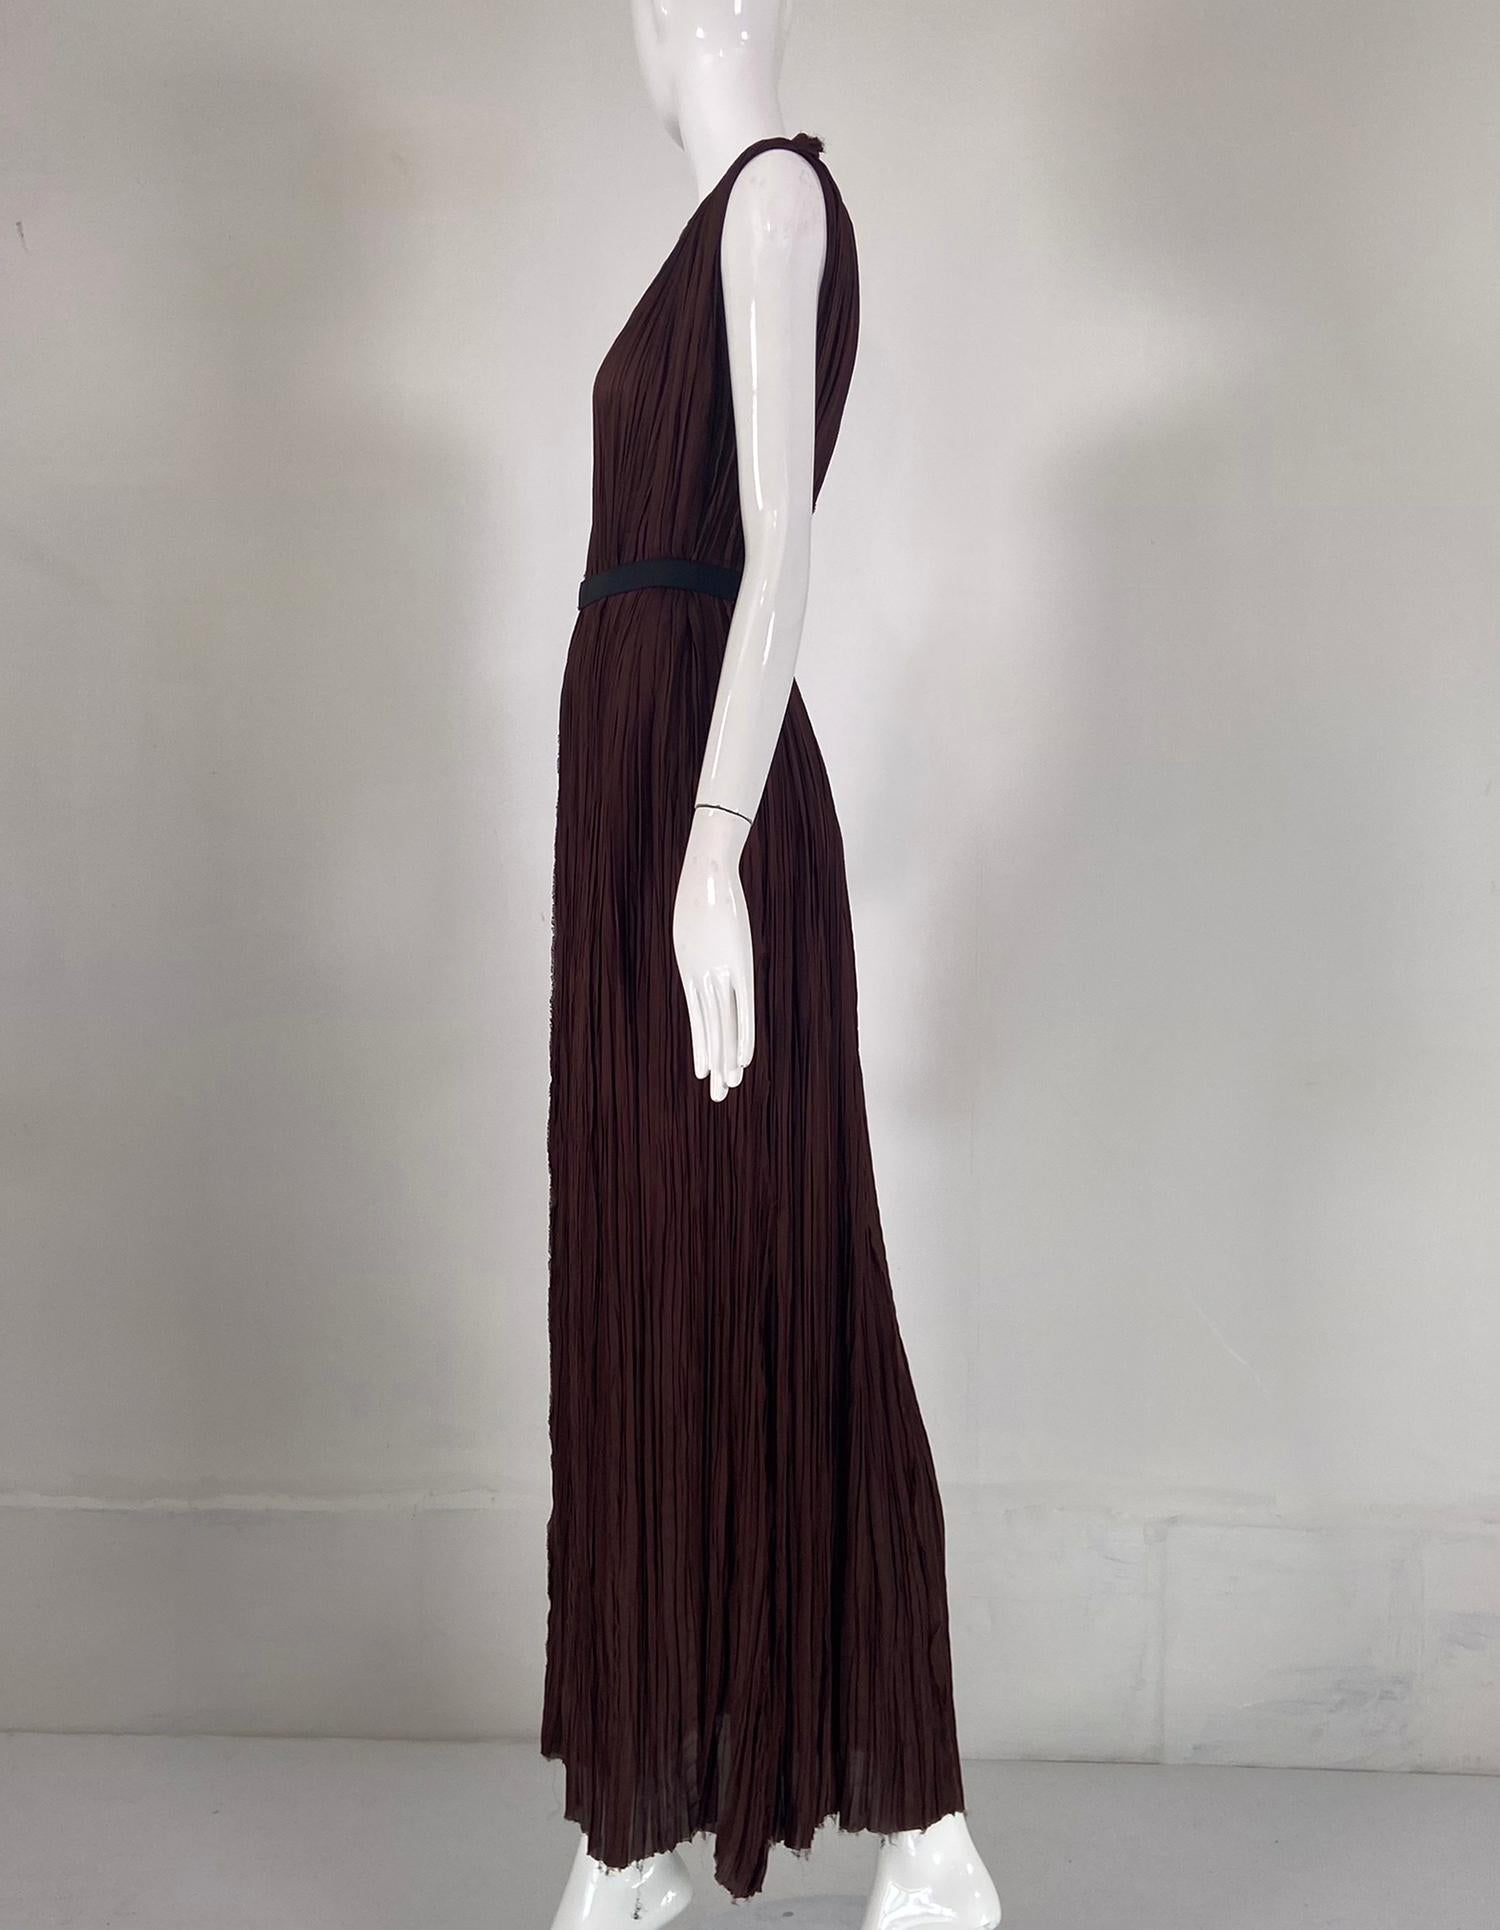 Lanvin Ete' 2005 Fortuny Pleated V Neck Maxi Dress Chocolate Brown Alber Elbaz 2